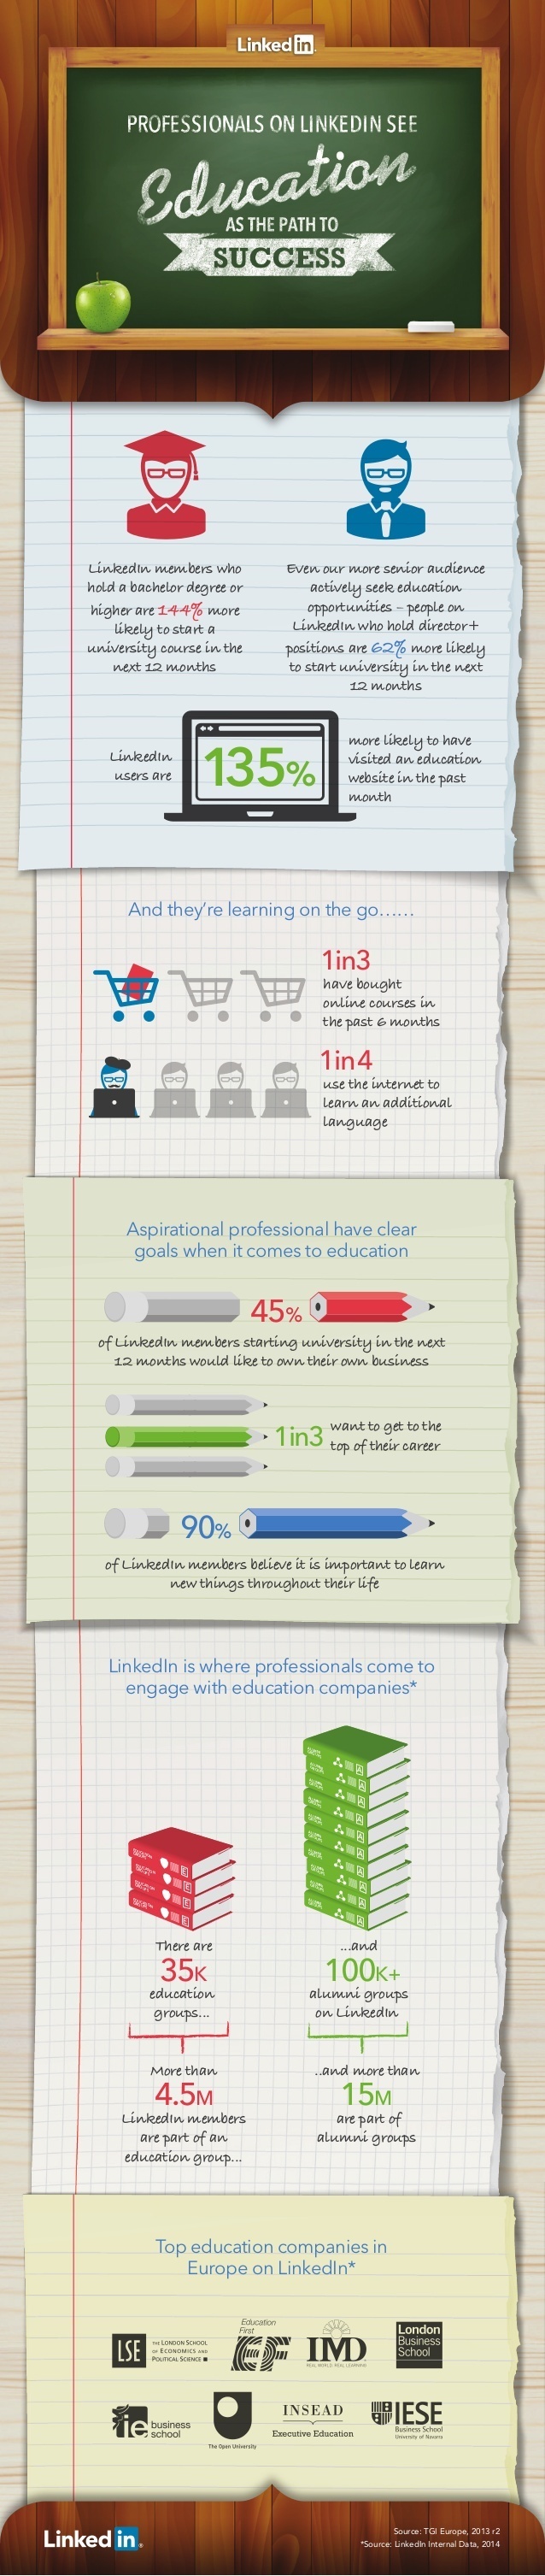 LinkedIn Members See Lifelong Learning as the Path to Success Infographic